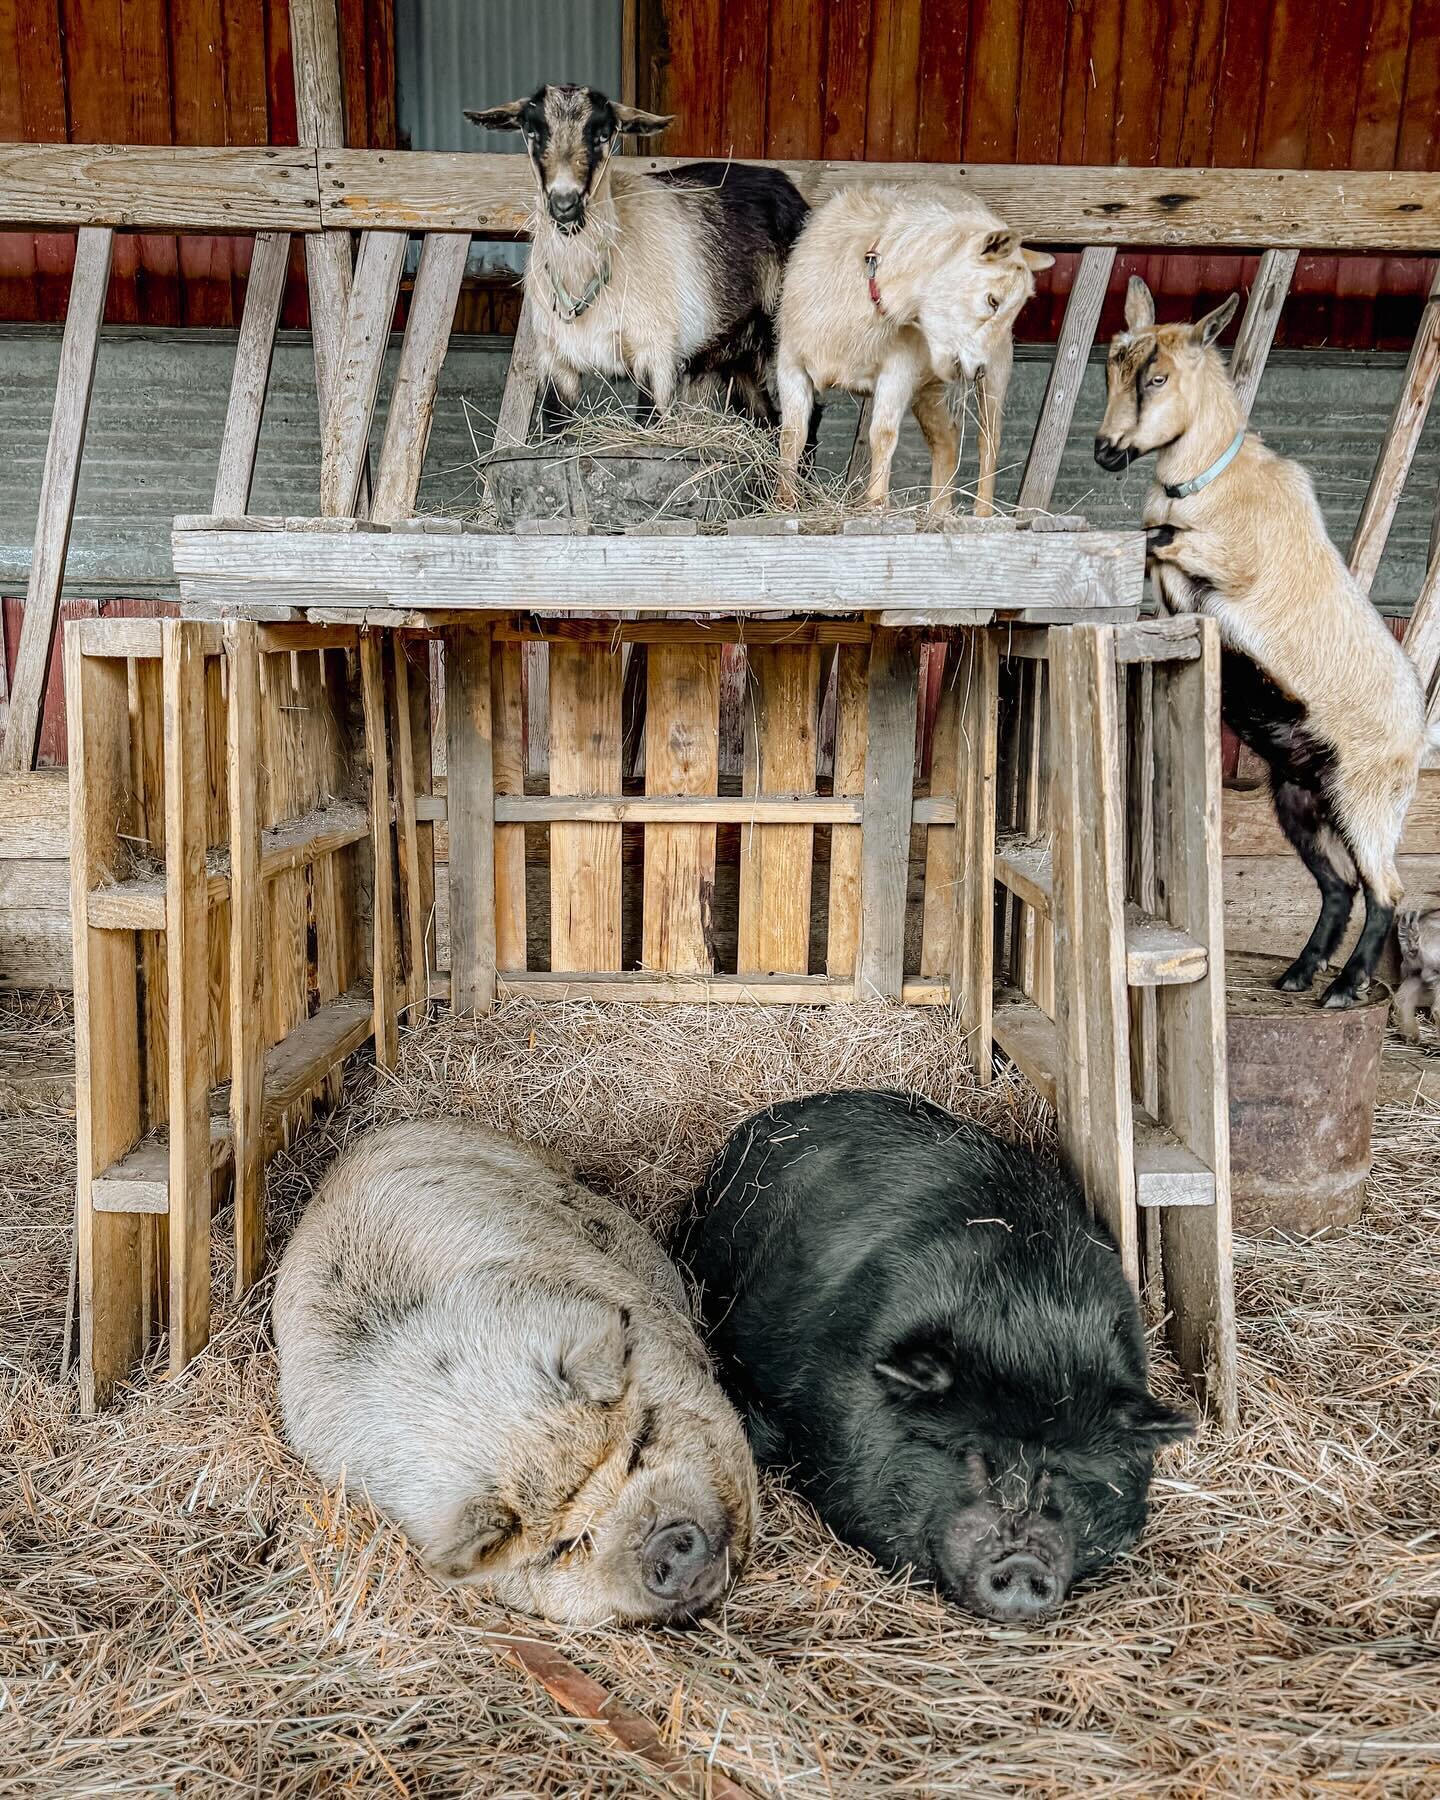 Morning naps required for some, while others are just beginning their day! Farm life!
.
.
.
.
.
.
#farmlife #kunekune #pigs #nigeriandwarfgoats #morningnaps #farm #pnwfarm